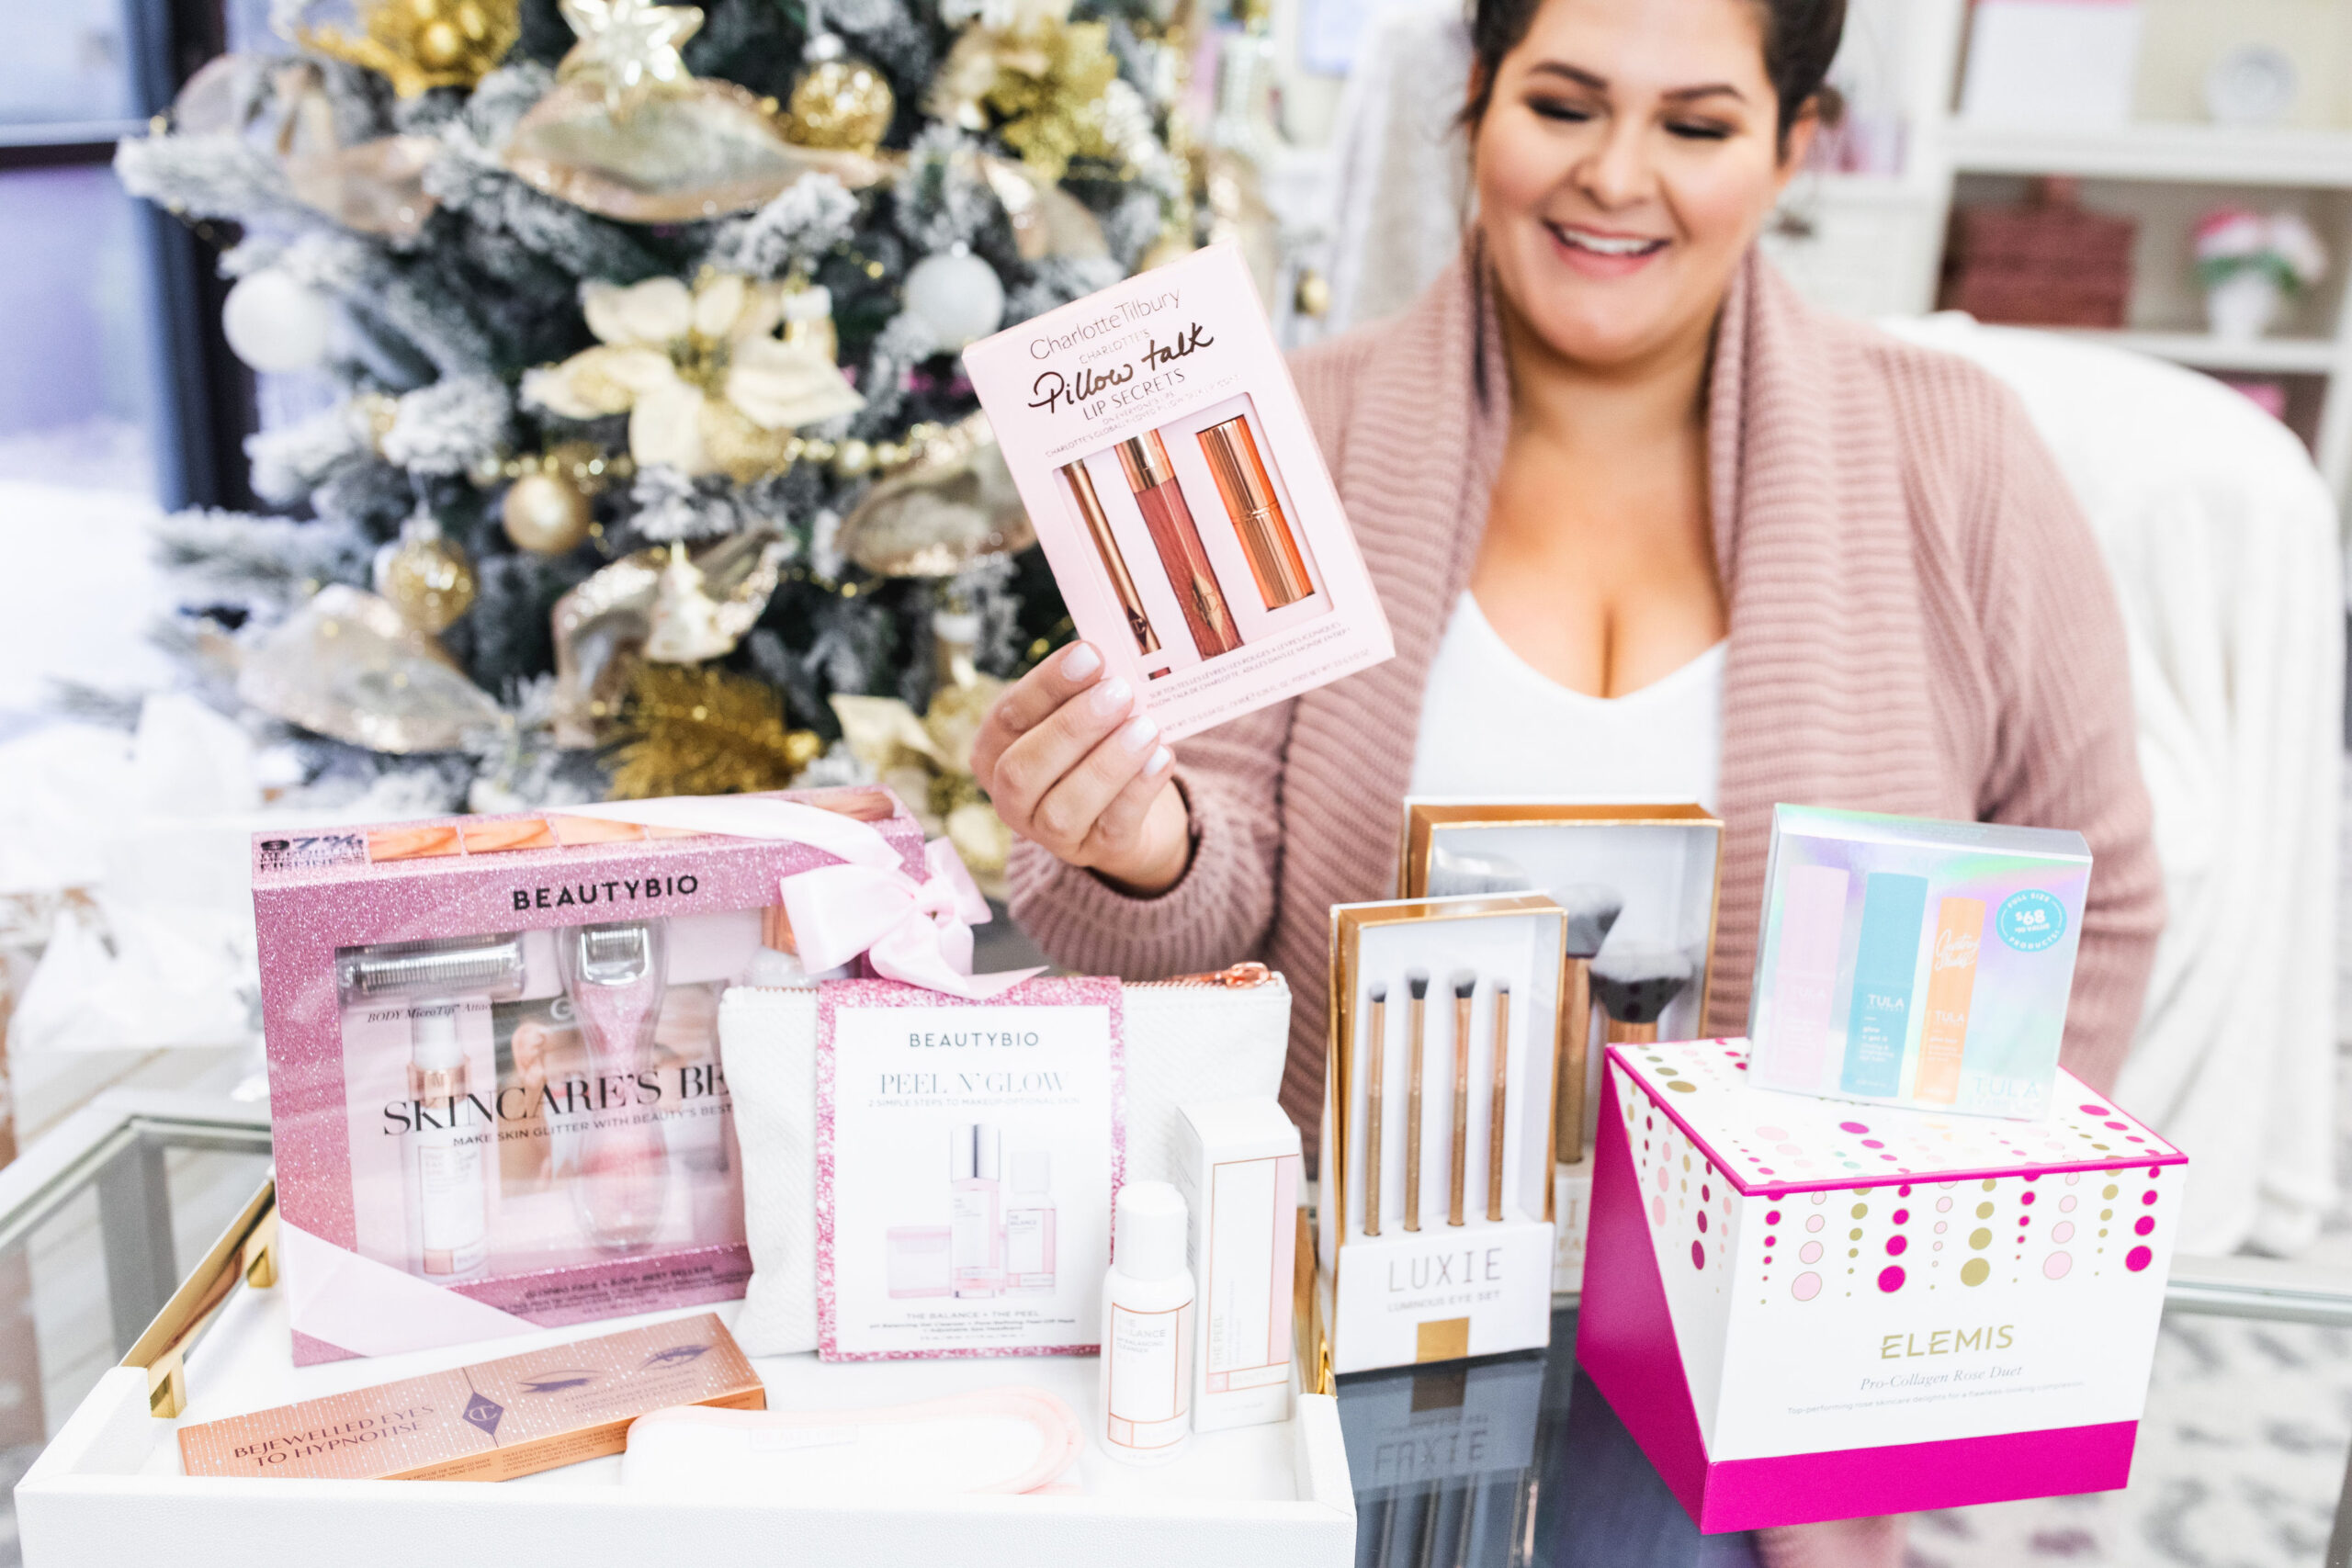 Holiday Beauty Gifts